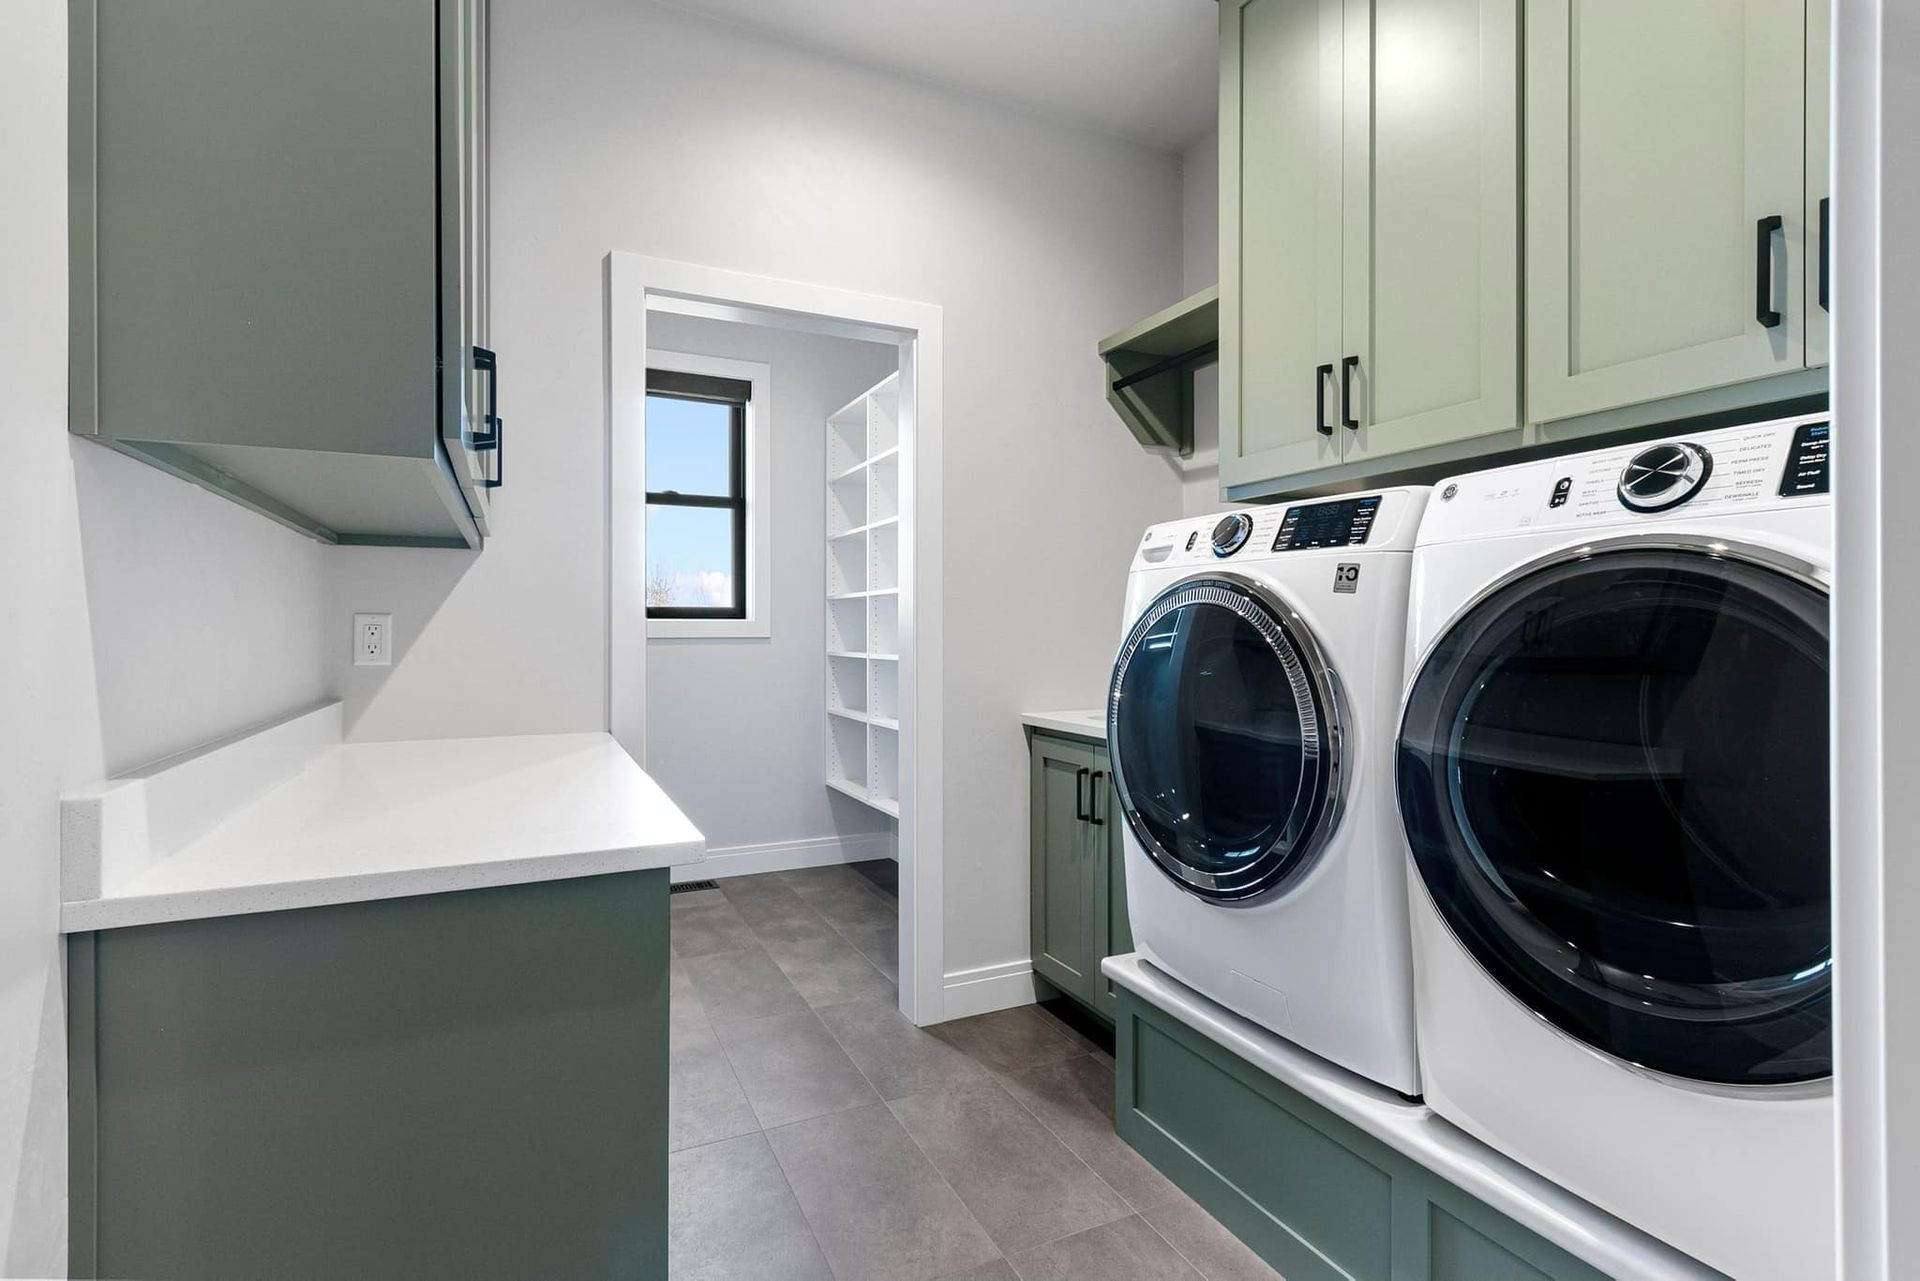 A laundry room with a washer and dryer and green cabinets.